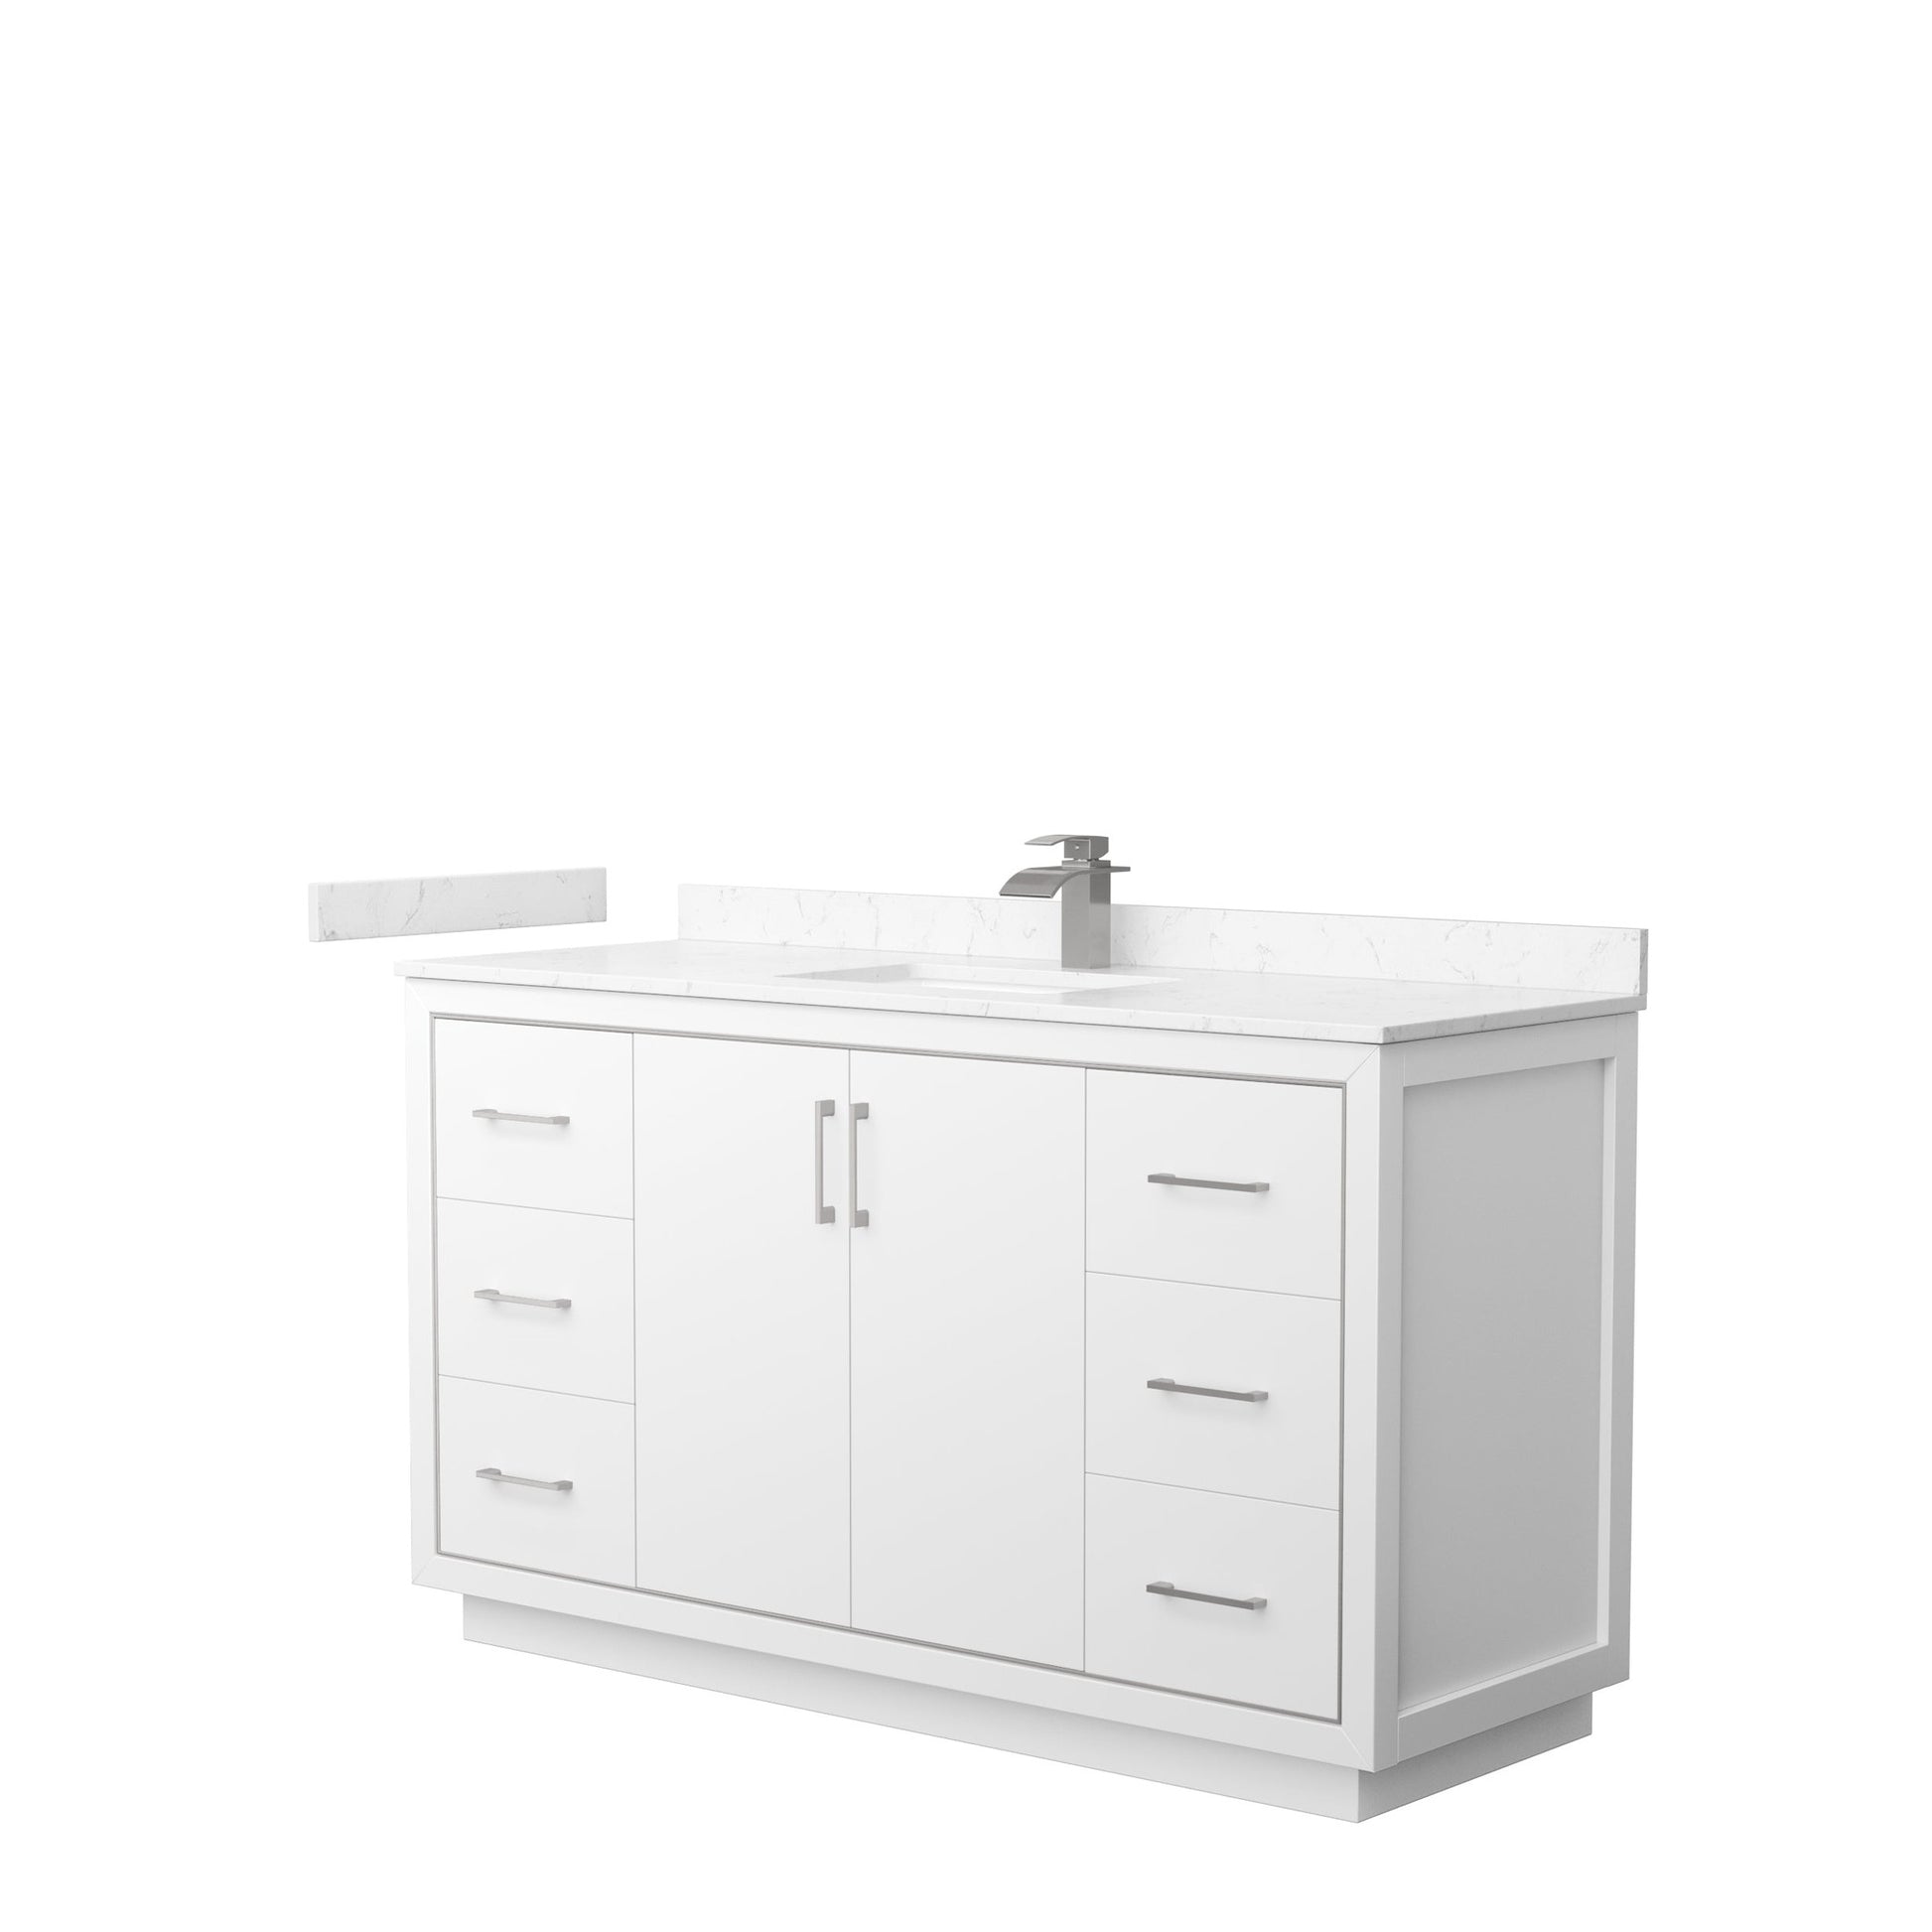 Wyndham Collection Icon 60" Single Bathroom Vanity in White, Carrara Cultured Marble Countertop, Undermount Square Sink, Brushed Nickel Trim